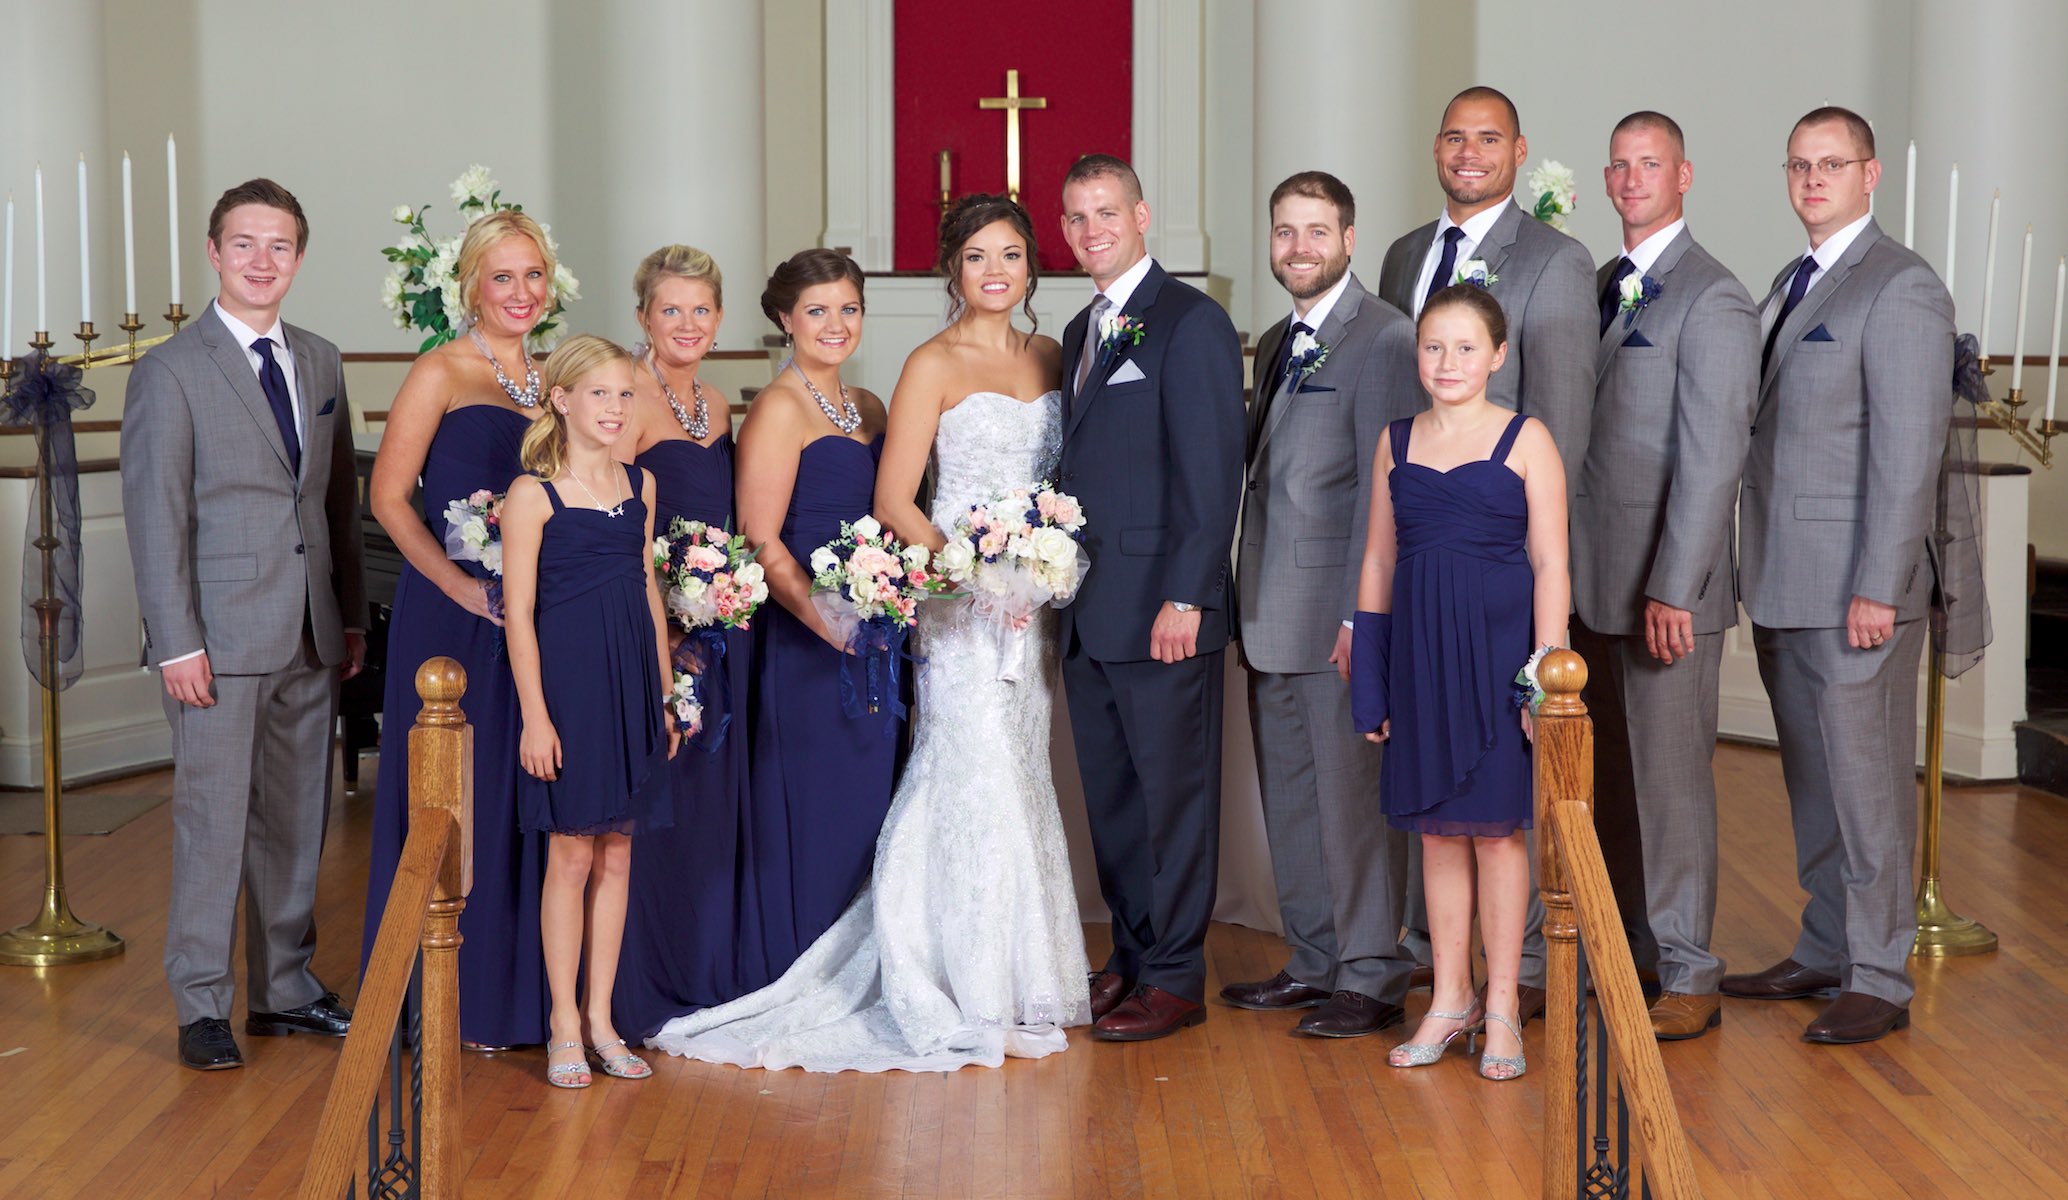 Jeremy and Adria with bridal party, portraits around MacMurray College's Annie Merner Chapel before the ceremony, Jacksonville, Illinois. Wedding photography by Steve & Tiffany Warmowski.